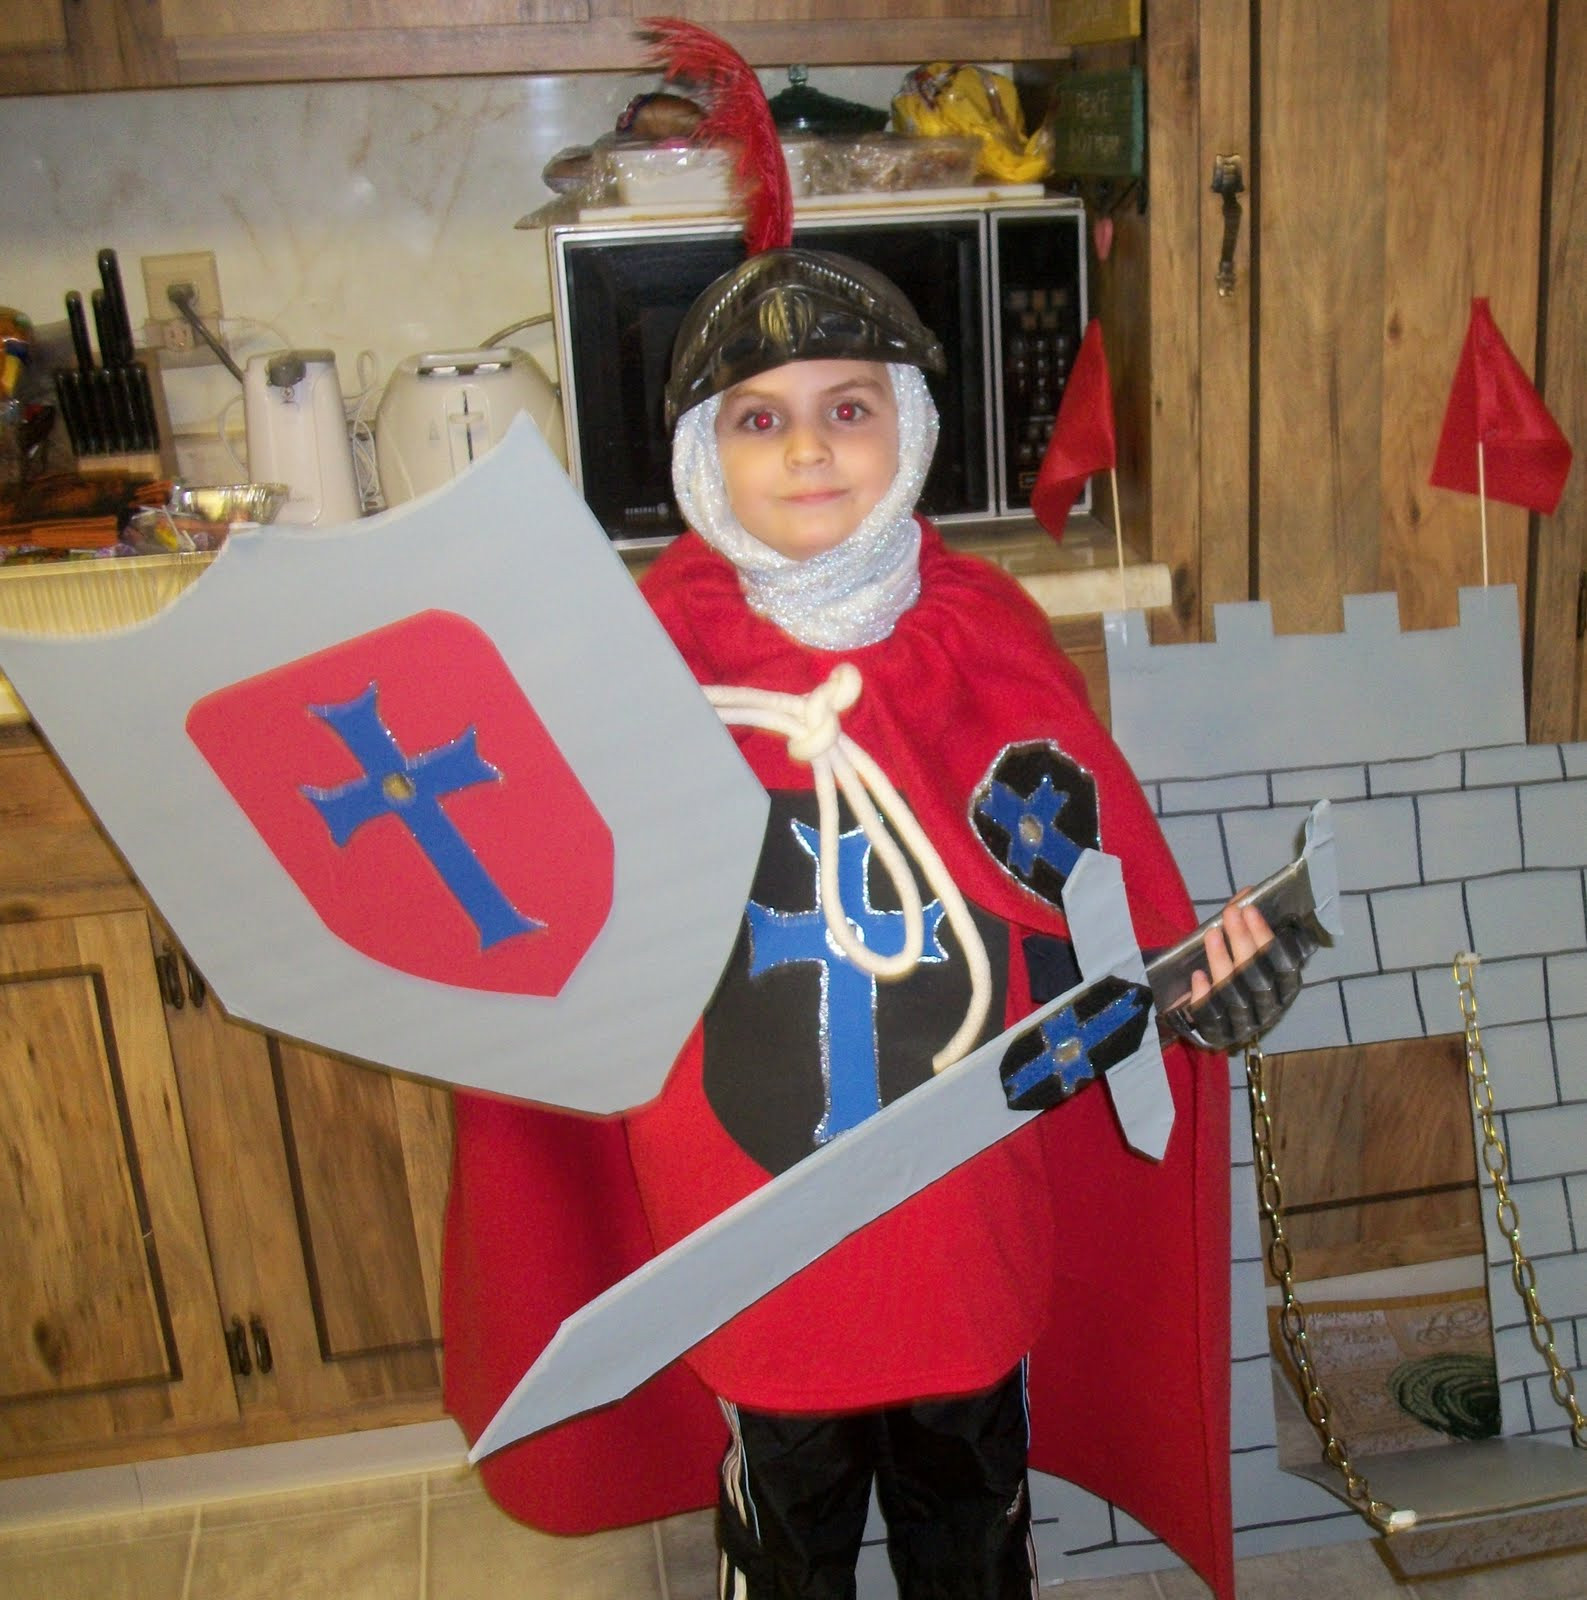 DIY Knight Costumes
 Super mom without a cape Homemade No Sew Knight Costume